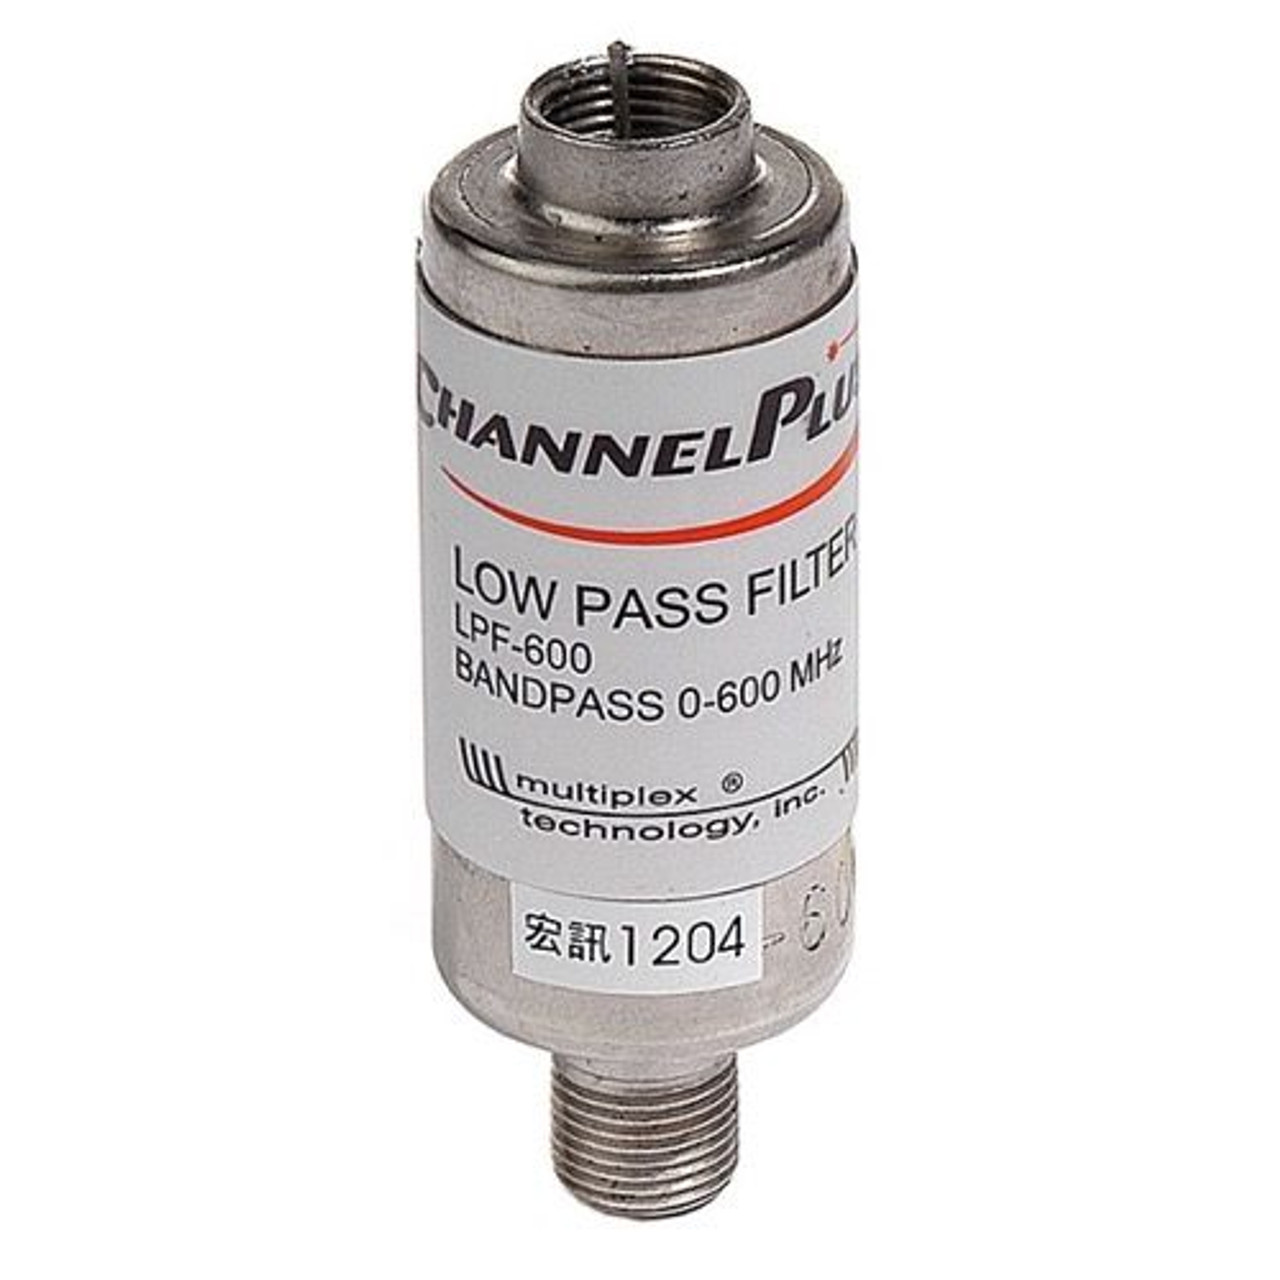 Channel Plus LPF-600 Low Pass Filter CATV Channel 2 Thru 86 600 MHz 1 Pack In-Line Low Band Pass Filter Coupler Barrel Adapter, Part # LPF-600